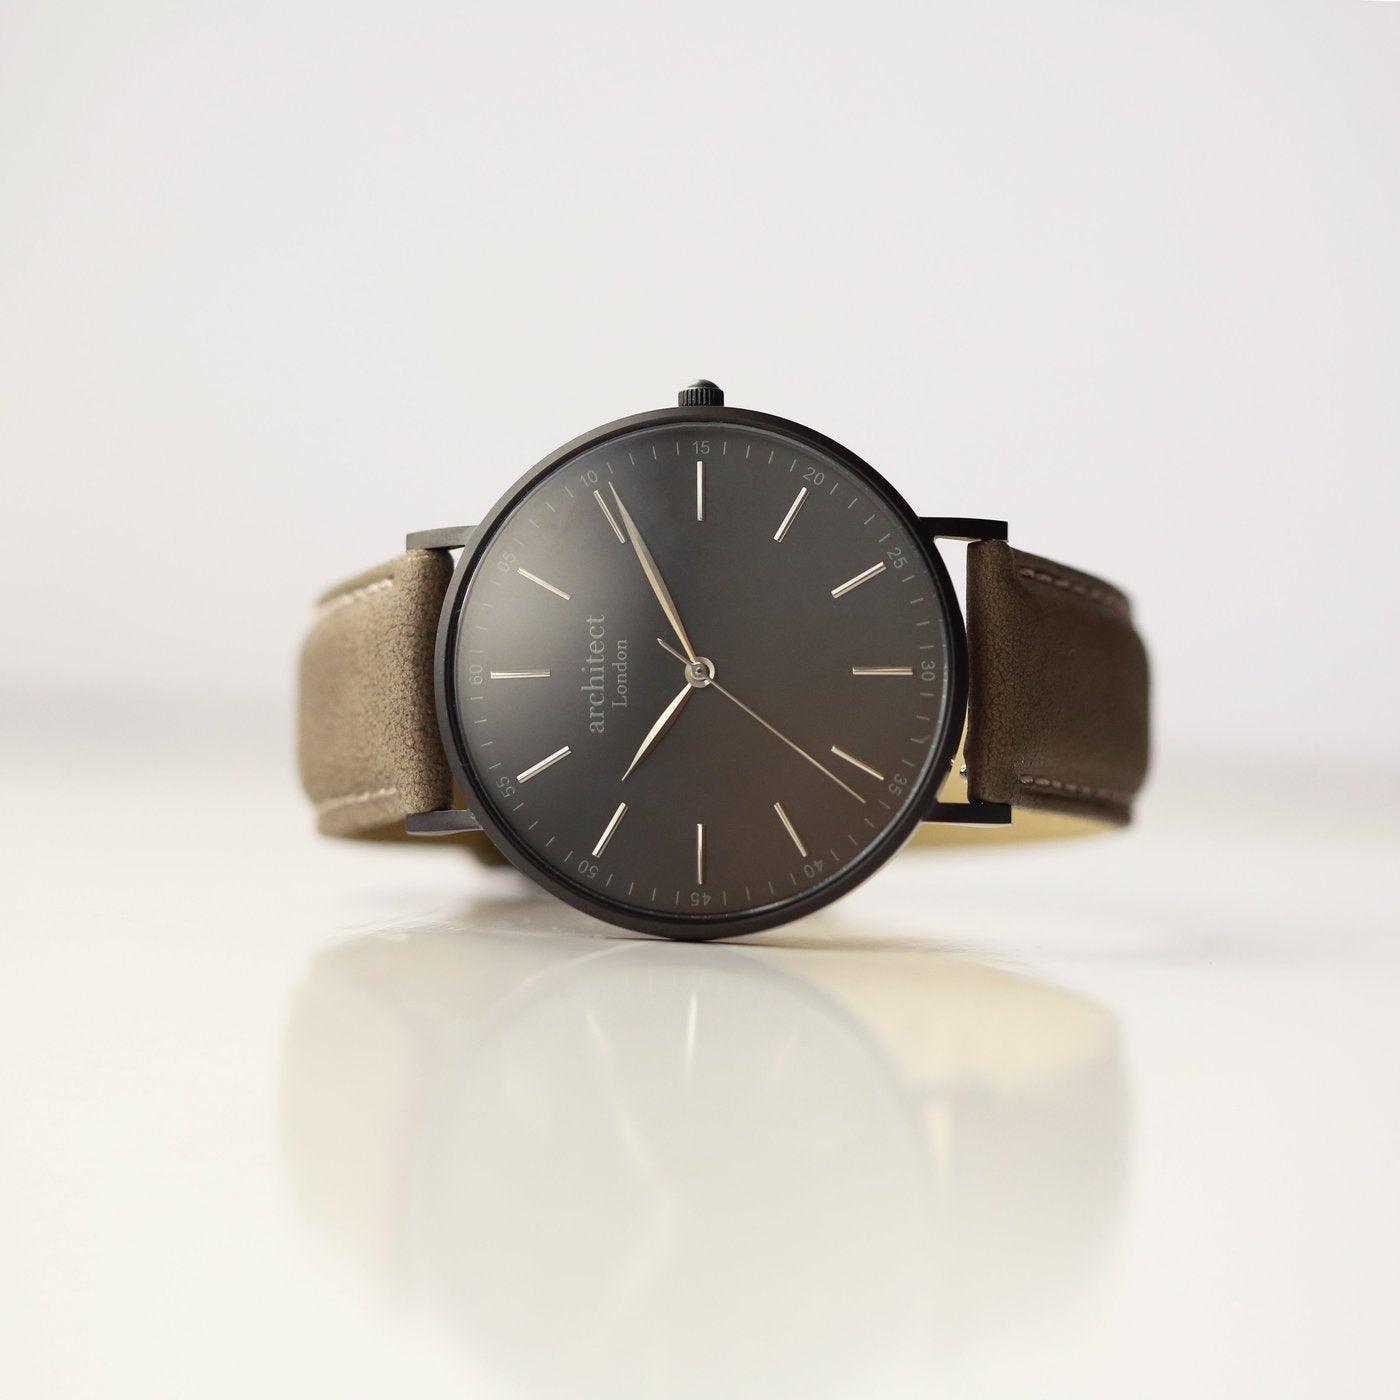 Handwriting Engraving Men's Minimalist Architect Watch With Urban Grey Strap - Shop Personalised Gifts